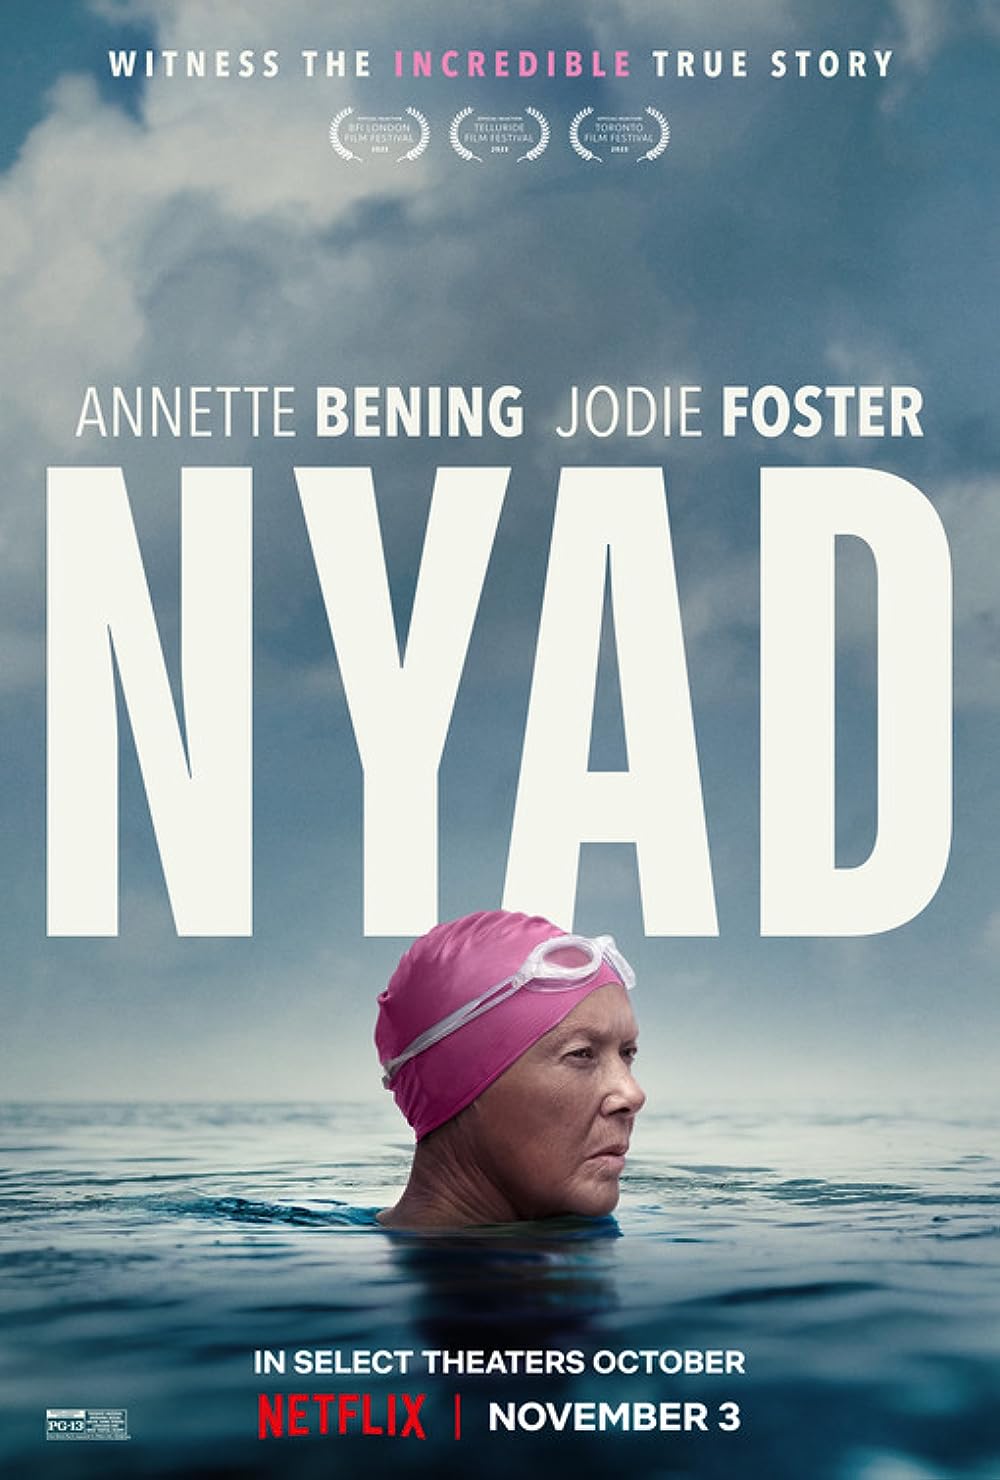 Netflix's Diana Nyad biopic: What's fact and what's fiction? - Los Angeles  Times